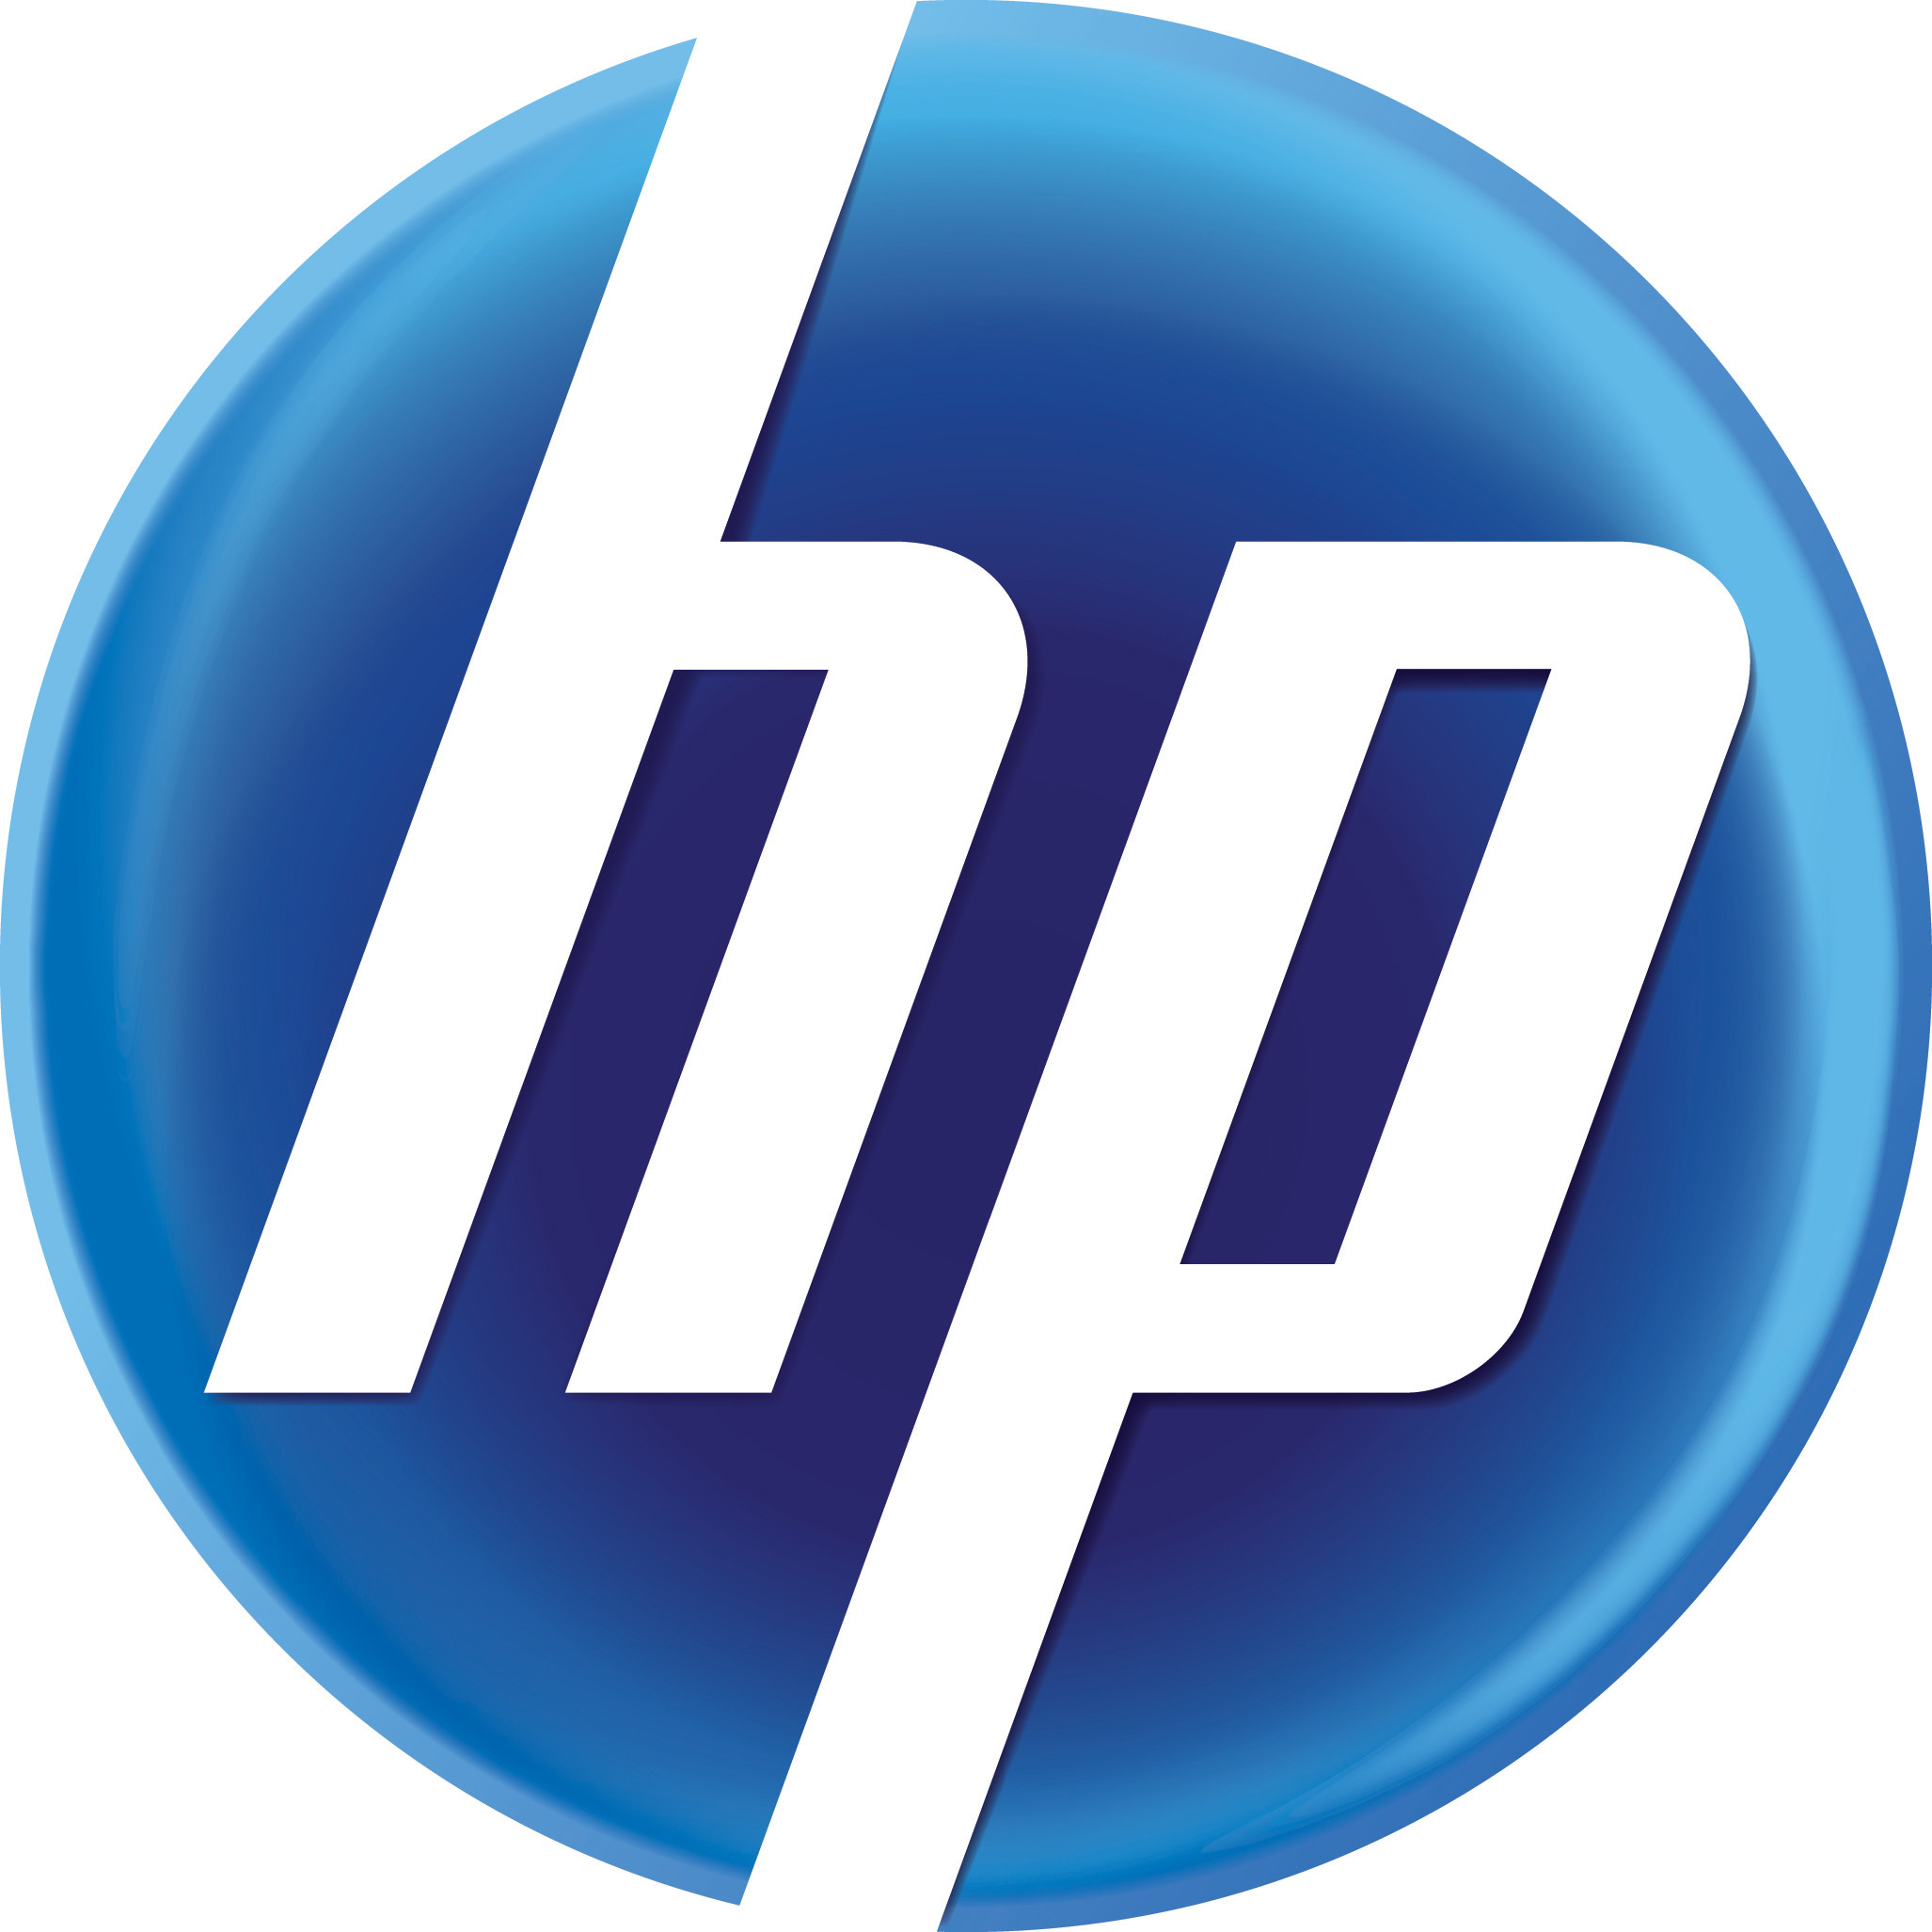 Coordinated solutions with partners we know and trust. Together we develop the best IT solutions Hewlett Packard